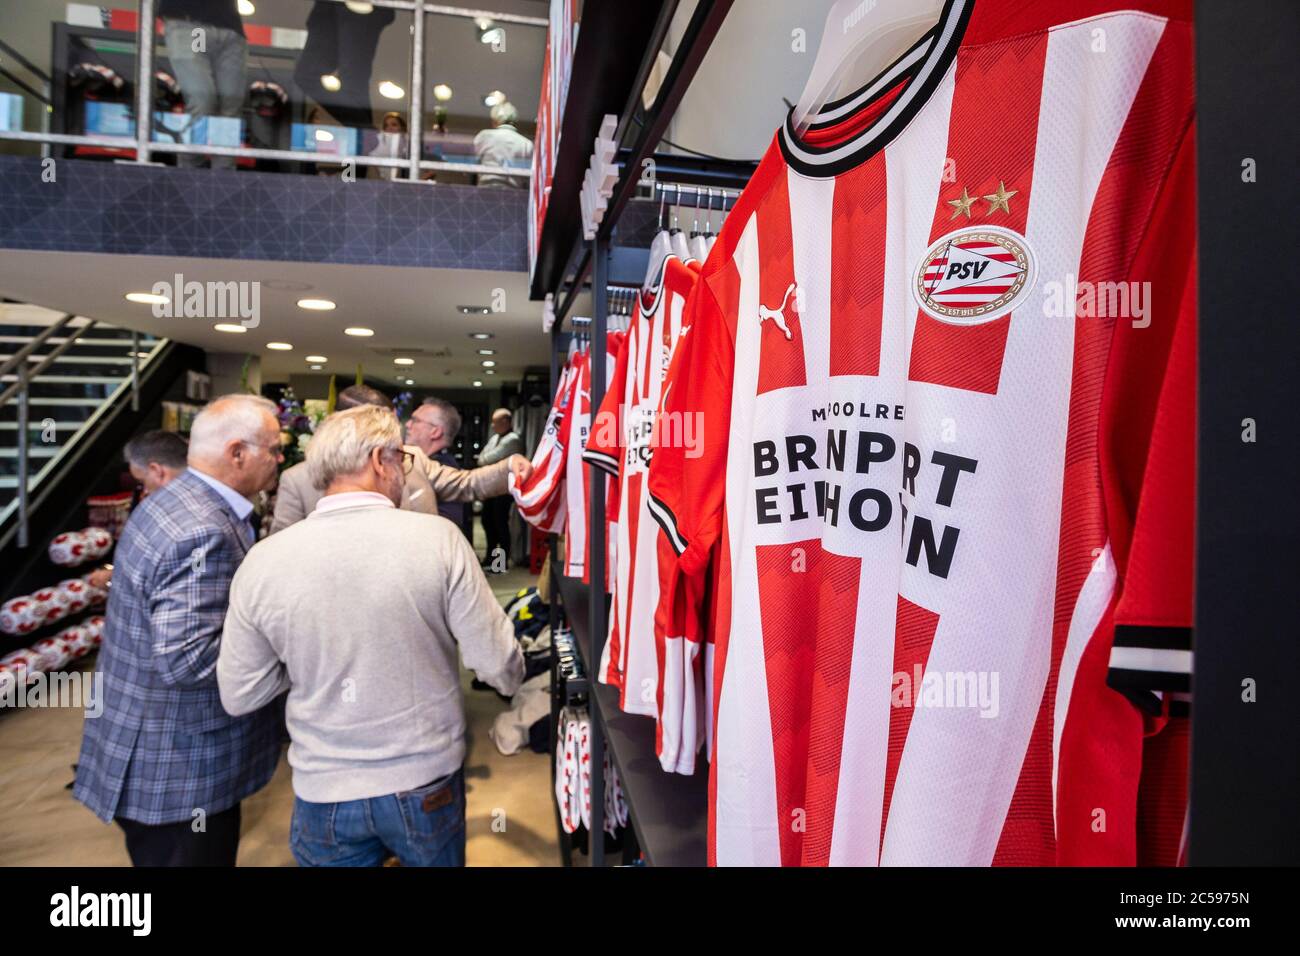 Eindhoven, Netherlands. 01st July, 2020. EINDHOVEN, 01-07-2020, PSV opens  new store in city centre.